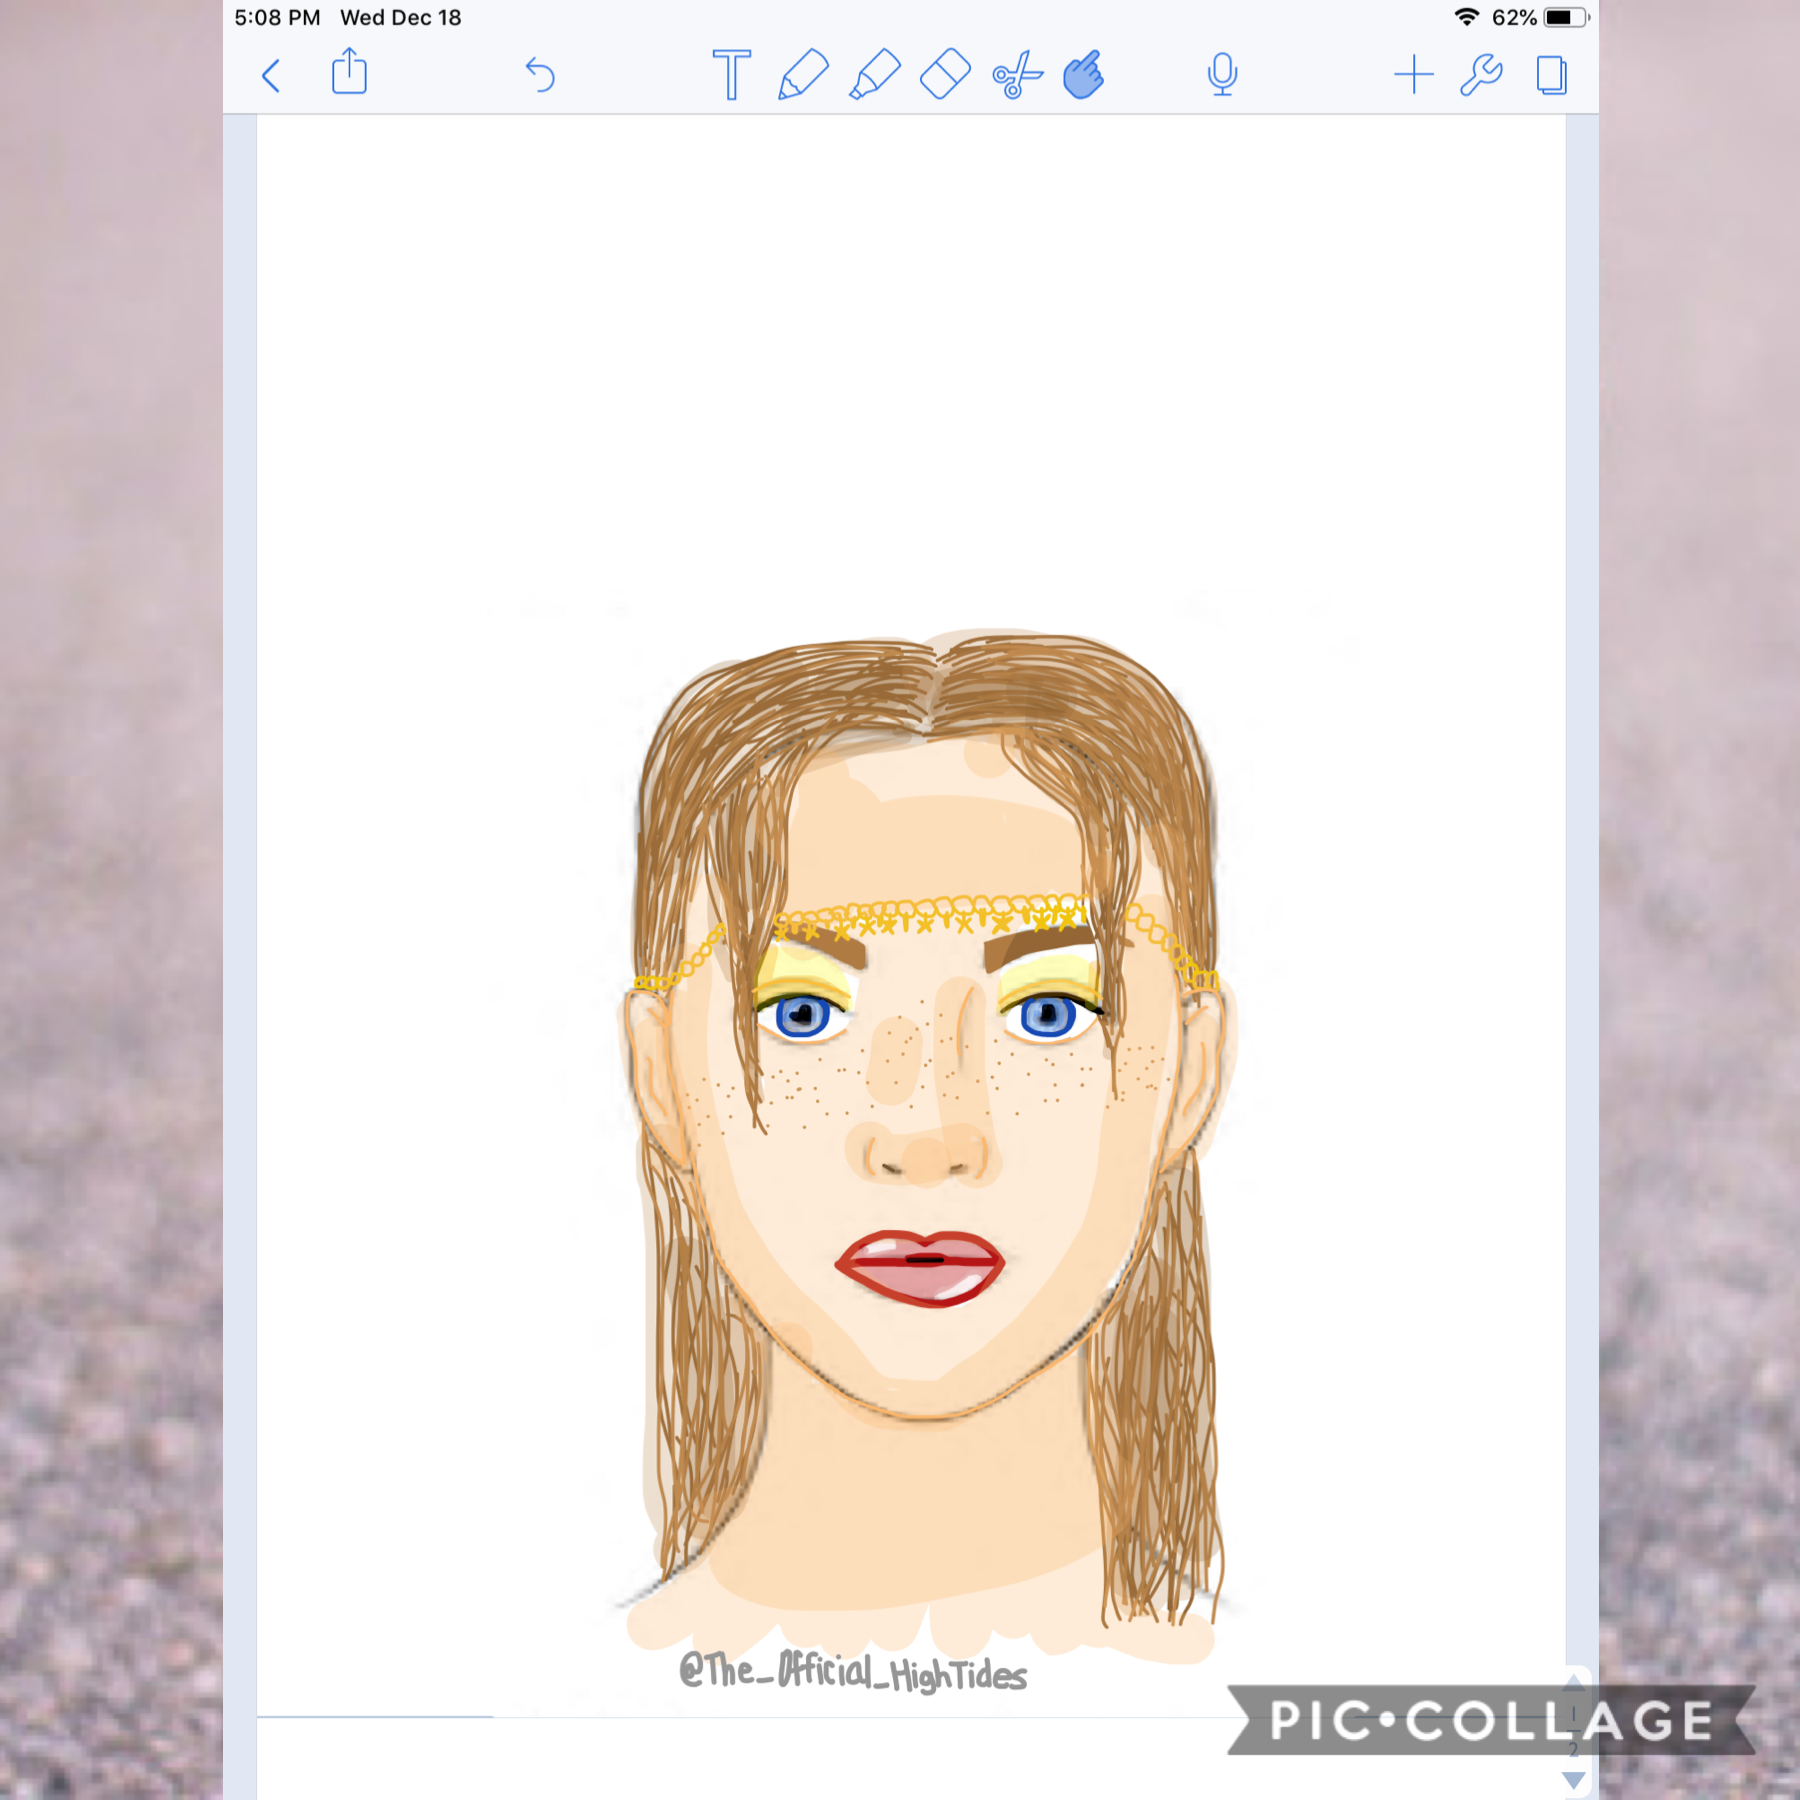 A new series? Idk it’s pretty bad but I hope to get better (yes I drew this)! TAP!
I used an outline for the face, eyes, nose mouth, and ears (but rest is all me)